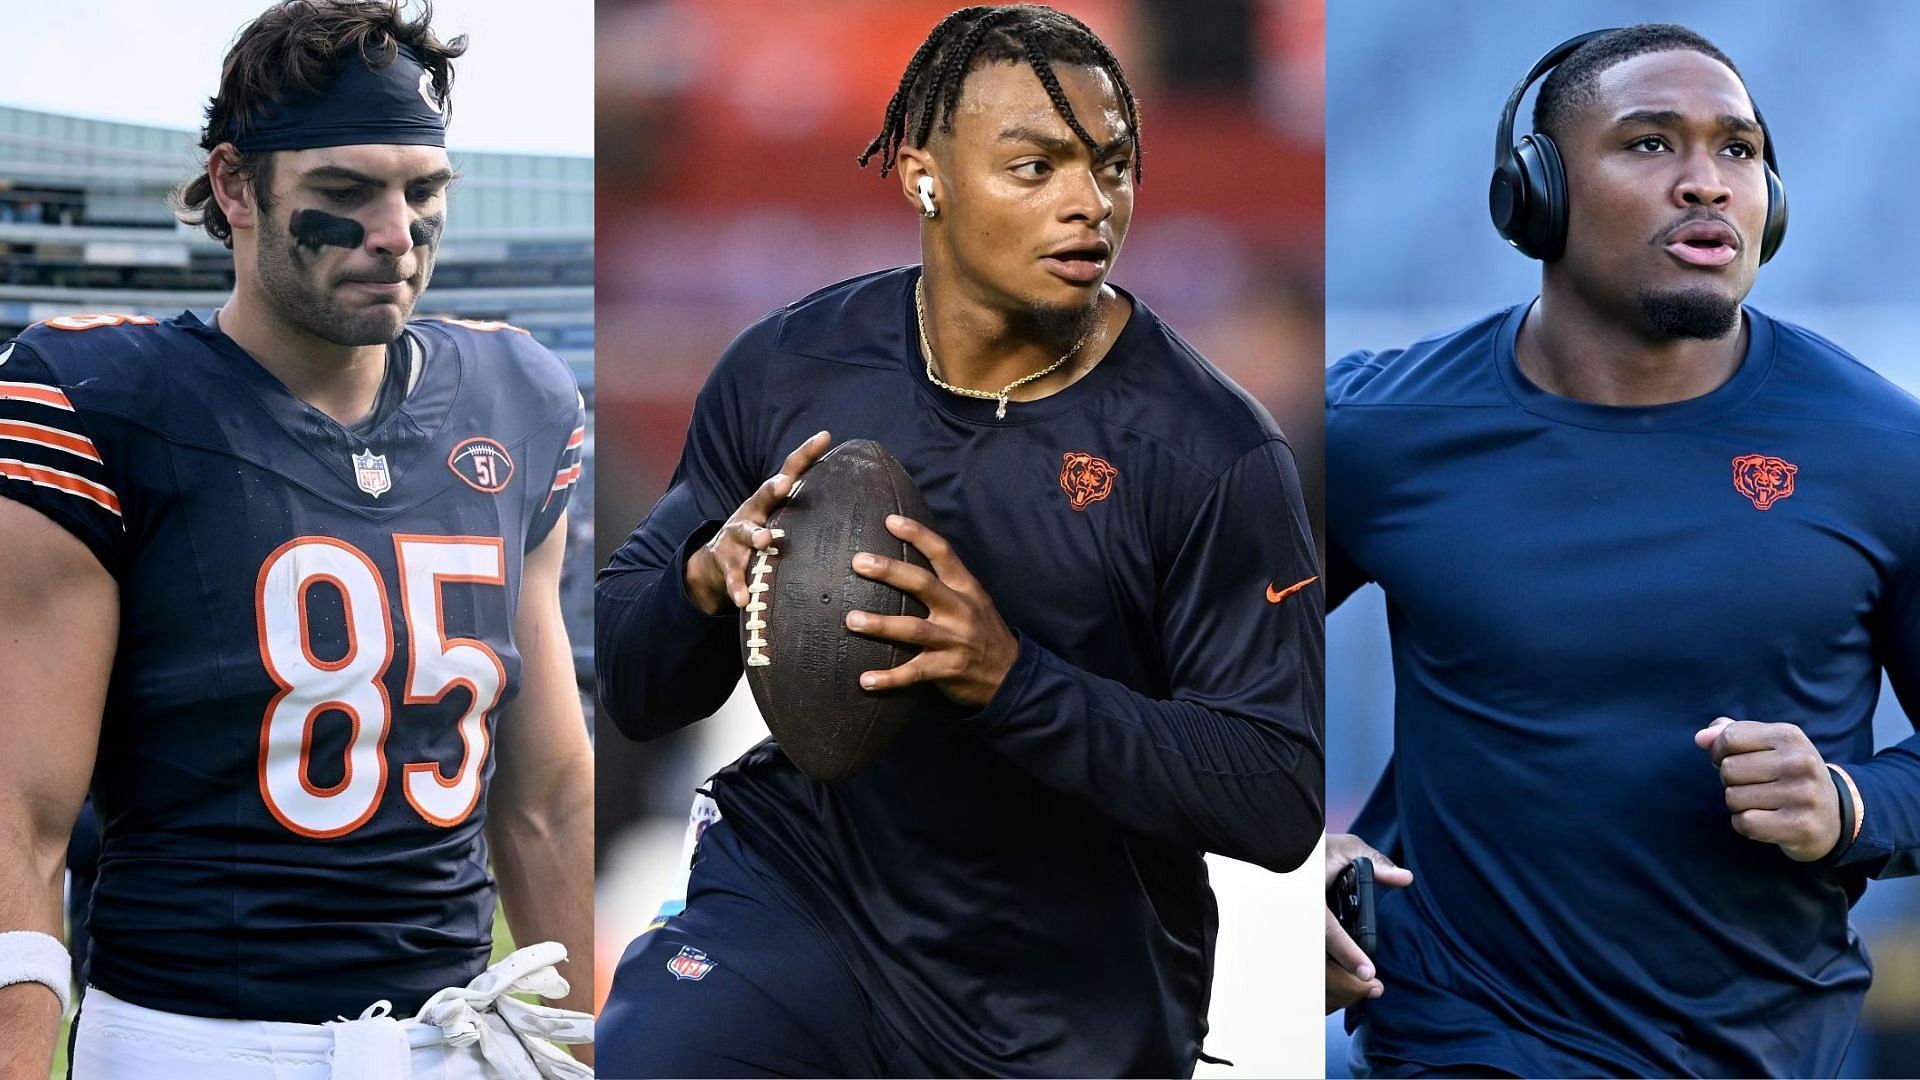 Chicago Bears players Cole Kmet, Justin Fields, and Khalil Herbert